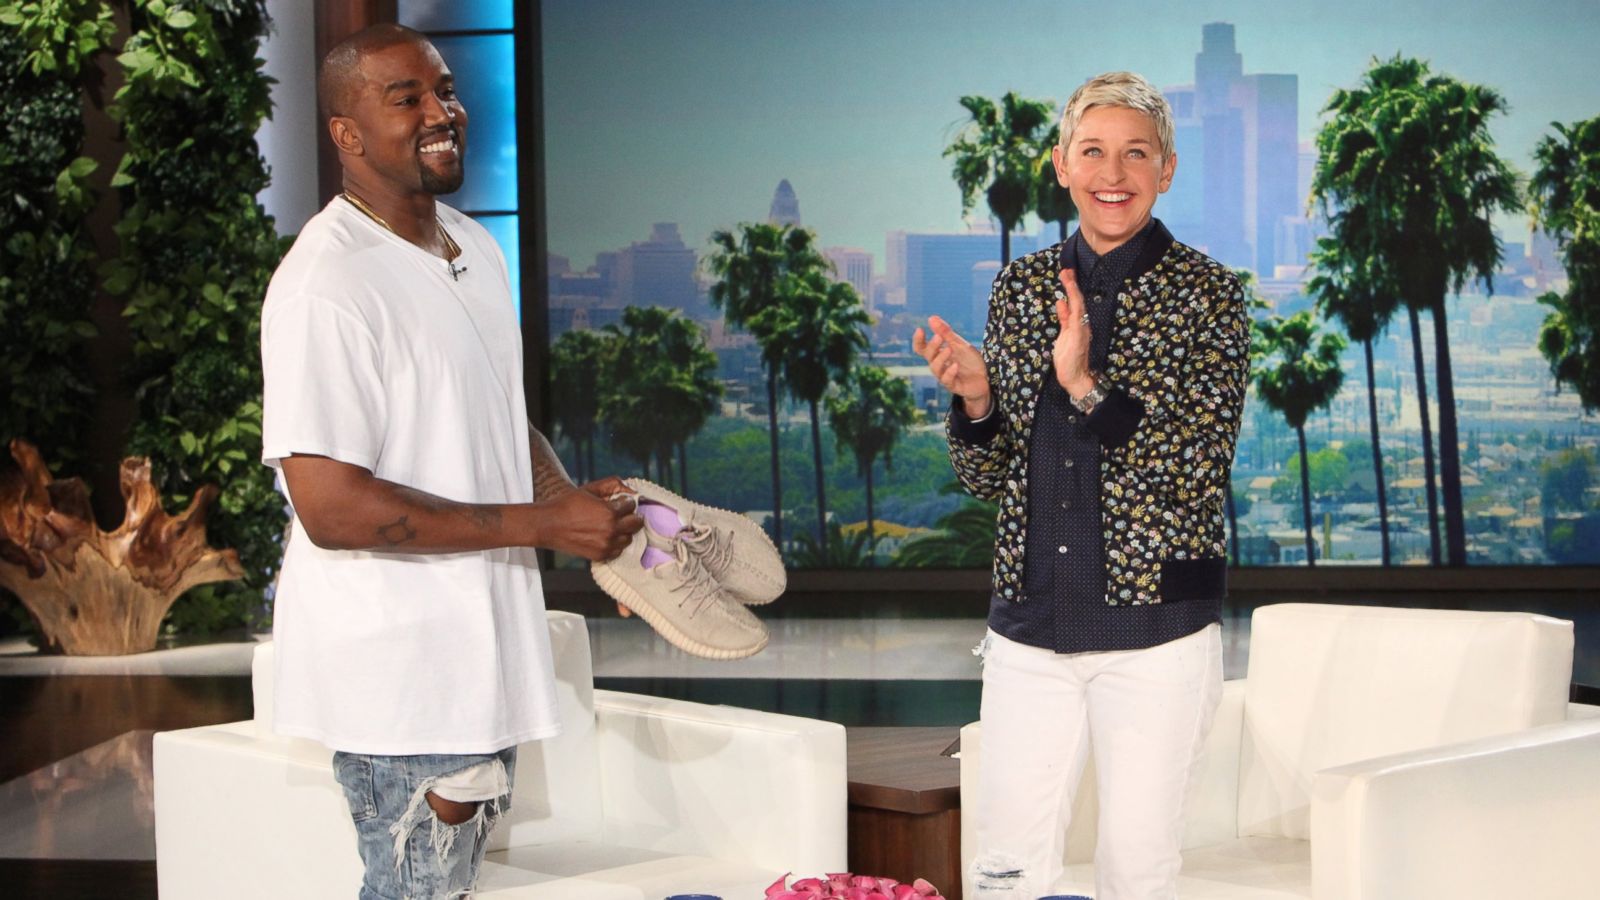 Kanye West on 'Ellen': What We Learned From His Rant - ABC News